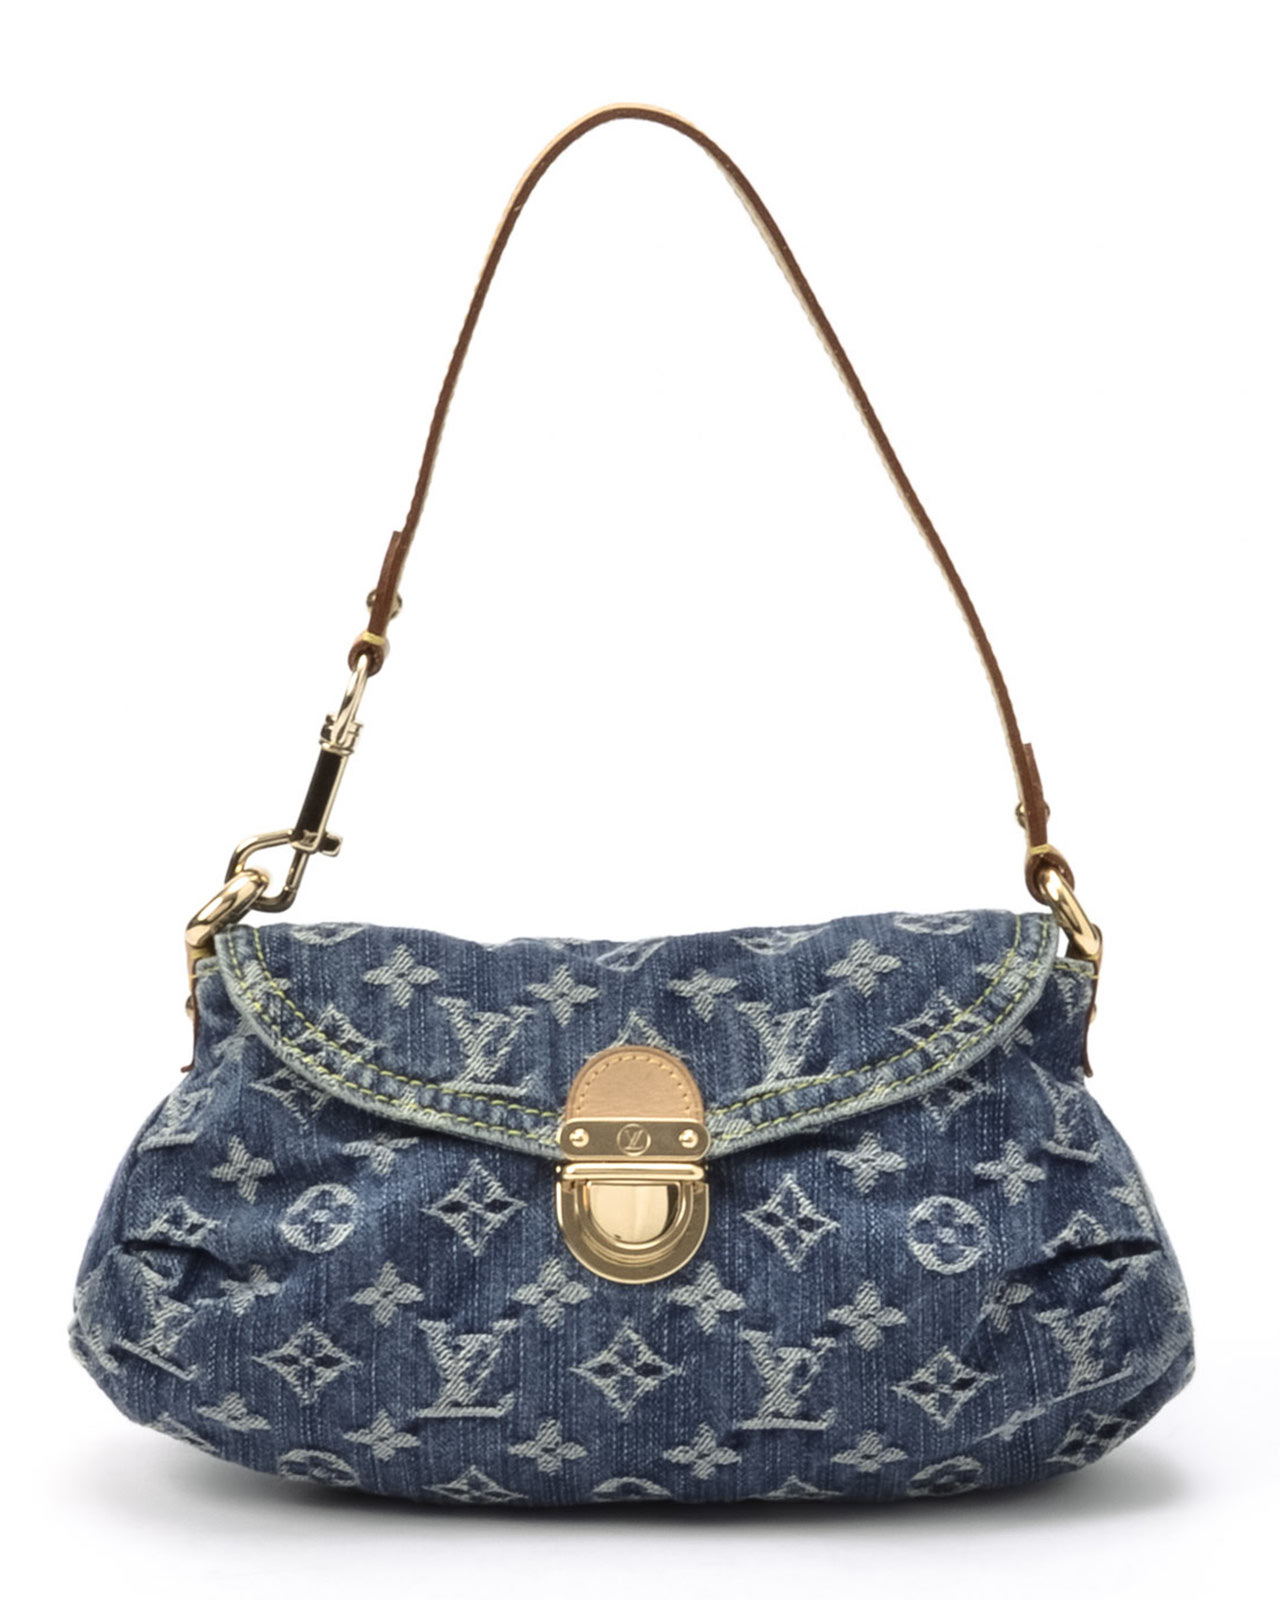 Fake Denim Louis Vuitton Bag | Confederated Tribes of the Umatilla Indian Reservation